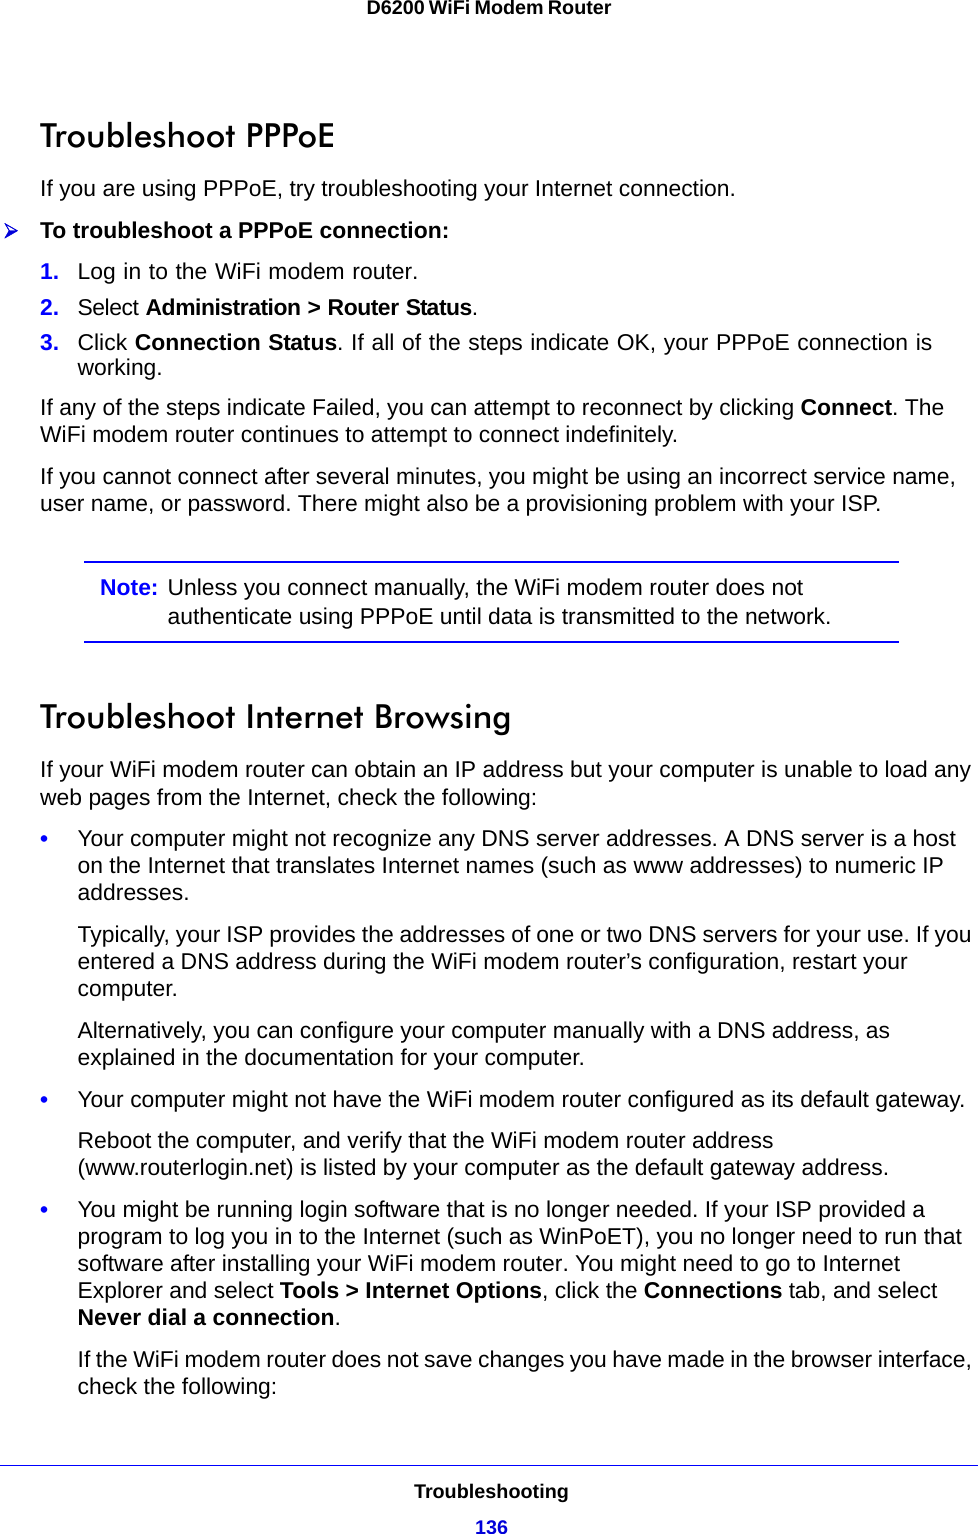 Troubleshooting136D6200 WiFi Modem Router Troubleshoot PPPoEIf you are using PPPoE, try troubleshooting your Internet connection.To troubleshoot a PPPoE connection:1. Log in to the WiFi modem router.2. Select Administration &gt; Router Status.3. Click Connection Status. If all of the steps indicate OK, your PPPoE connection is working.If any of the steps indicate Failed, you can attempt to reconnect by clicking Connect. The WiFi modem router continues to attempt to connect indefinitely.If you cannot connect after several minutes, you might be using an incorrect service name, user name, or password. There might also be a provisioning problem with your ISP.Note: Unless you connect manually, the WiFi modem router does not authenticate using PPPoE until data is transmitted to the network.Troubleshoot Internet BrowsingIf your WiFi modem router can obtain an IP address but your computer is unable to load any web pages from the Internet, check the following:•Your computer might not recognize any DNS server addresses. A DNS server is a host on the Internet that translates Internet names (such as www addresses) to numeric IP addresses.Typically, your ISP provides the addresses of one or two DNS servers for your use. If you entered a DNS address during the WiFi modem router’s configuration, restart your computer.Alternatively, you can configure your computer manually with a DNS address, as explained in the documentation for your computer.•Your computer might not have the WiFi modem router configured as its default gateway.Reboot the computer, and verify that the WiFi modem router address (www.routerlogin.net) is listed by your computer as the default gateway address.•You might be running login software that is no longer needed. If your ISP provided a program to log you in to the Internet (such as WinPoET), you no longer need to run that software after installing your WiFi modem router. You might need to go to Internet Explorer and select Tools &gt; Internet Options, click the Connections tab, and select Never dial a connection.If the WiFi modem router does not save changes you have made in the browser interface, check the following: